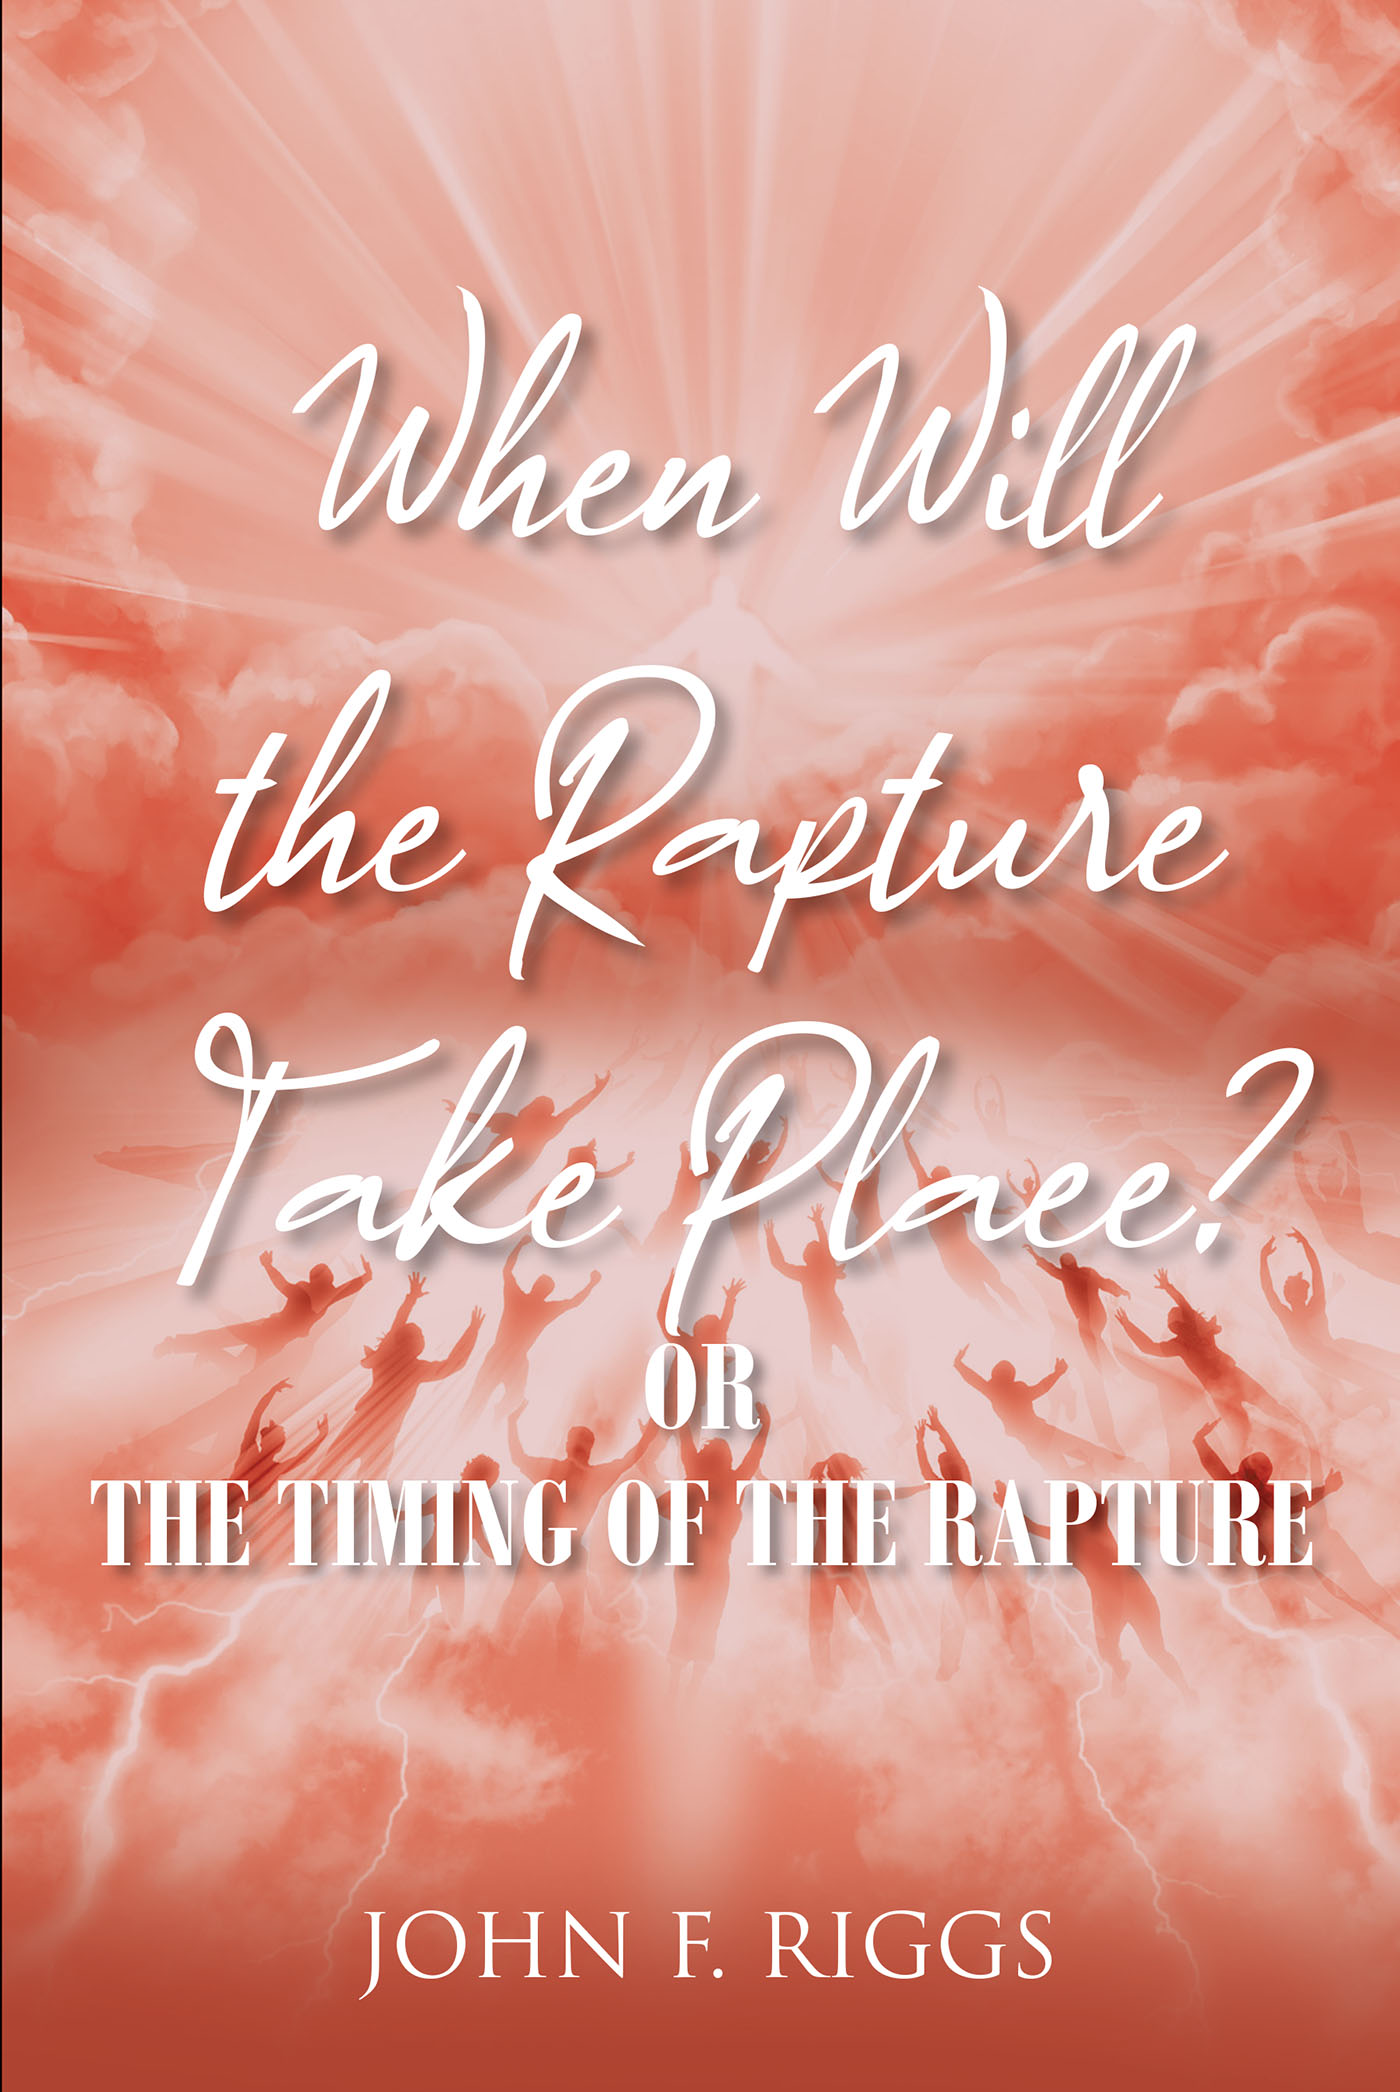 John F. Riggs’s Newly Released "When Will the Rapture Take Place? or The Timing of the Rapture" is a Fascinating Eschatological Study